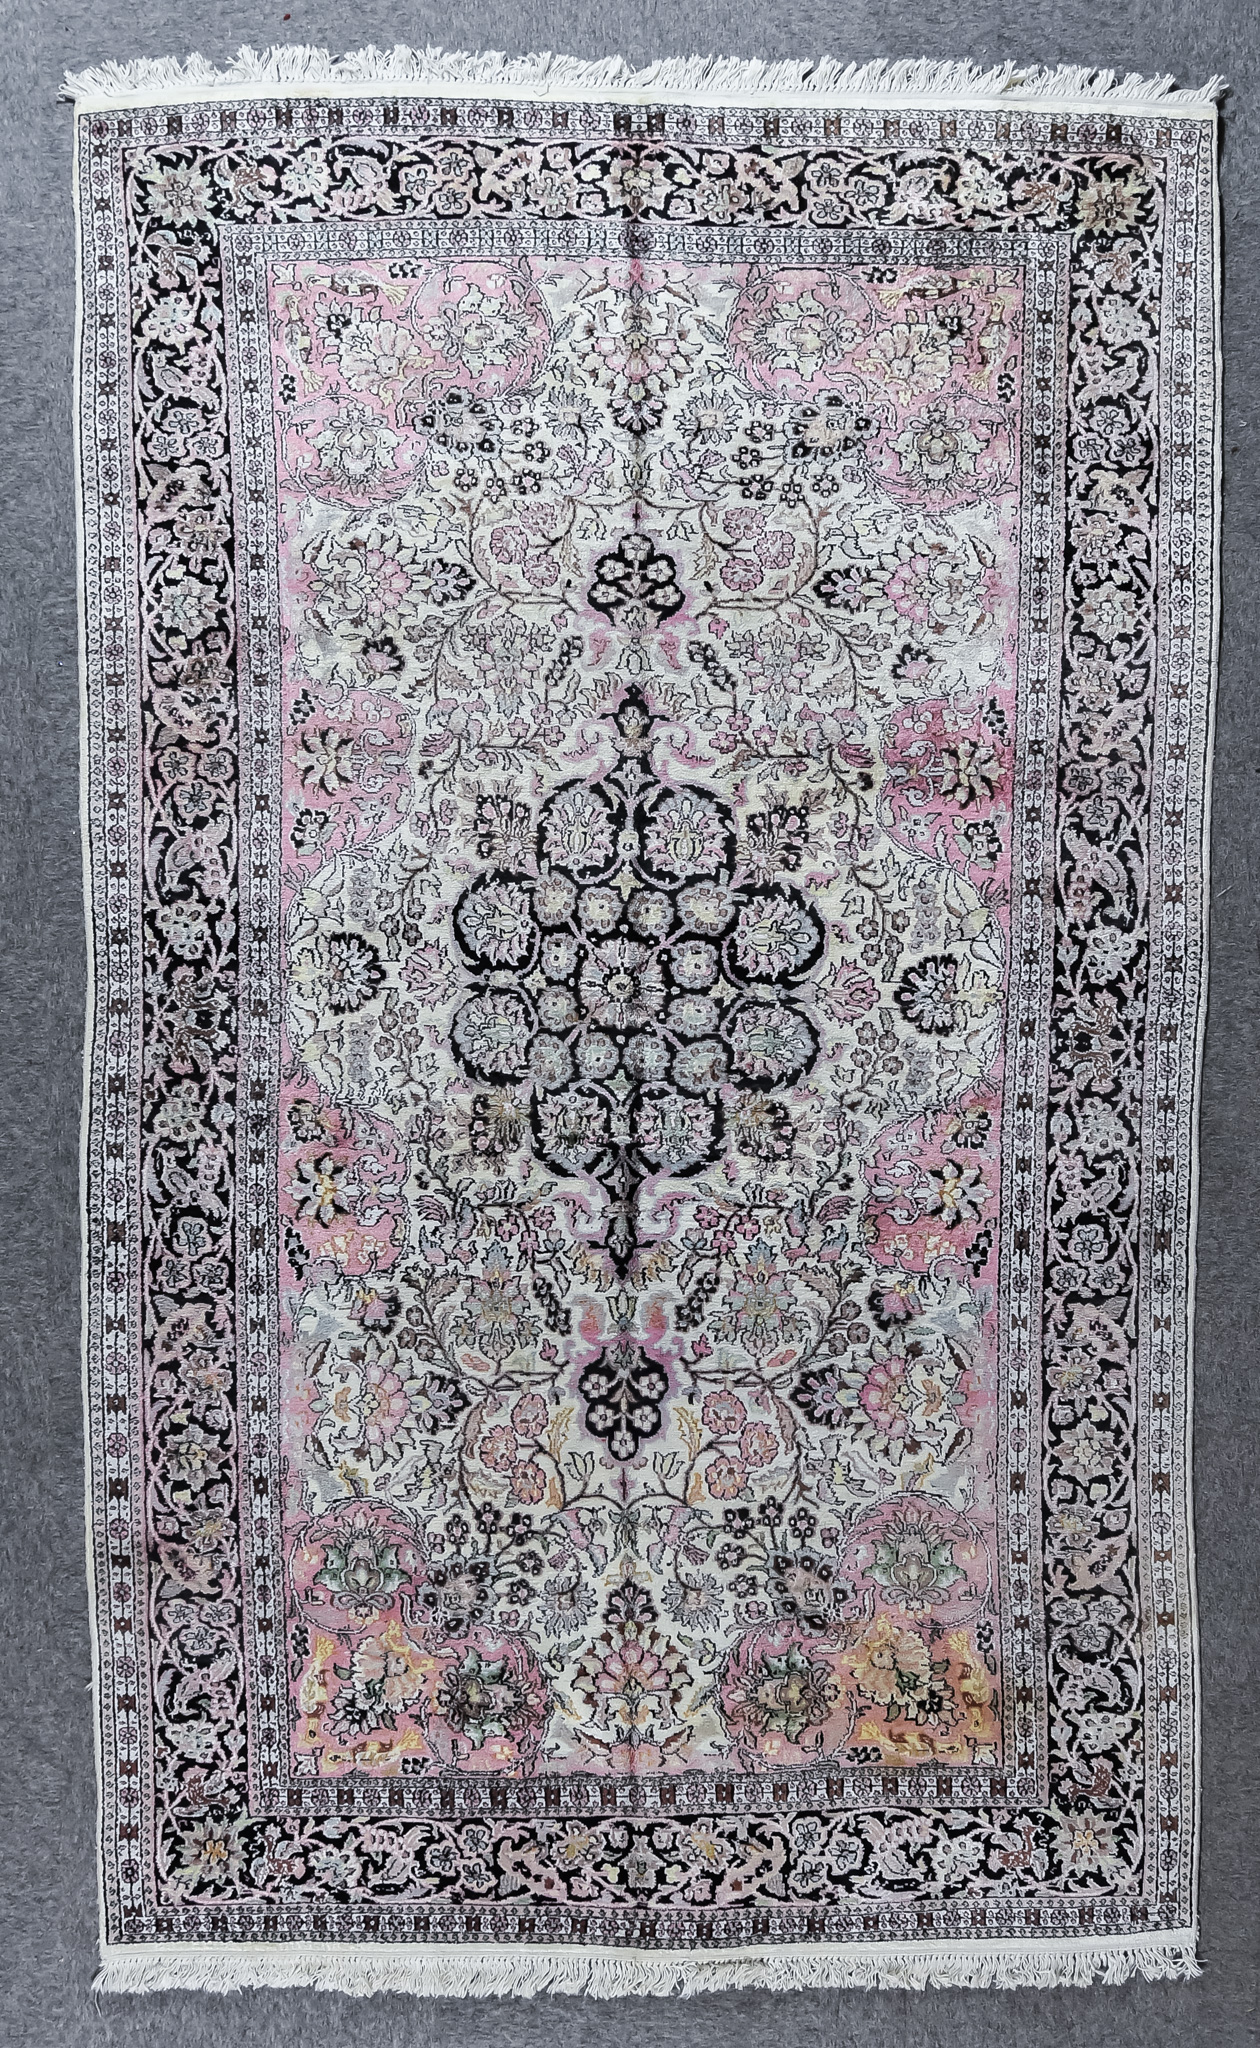 A 20th Century Pure Silk Tabriz Carpet, woven in pastel shades with a bold central floral medallion,